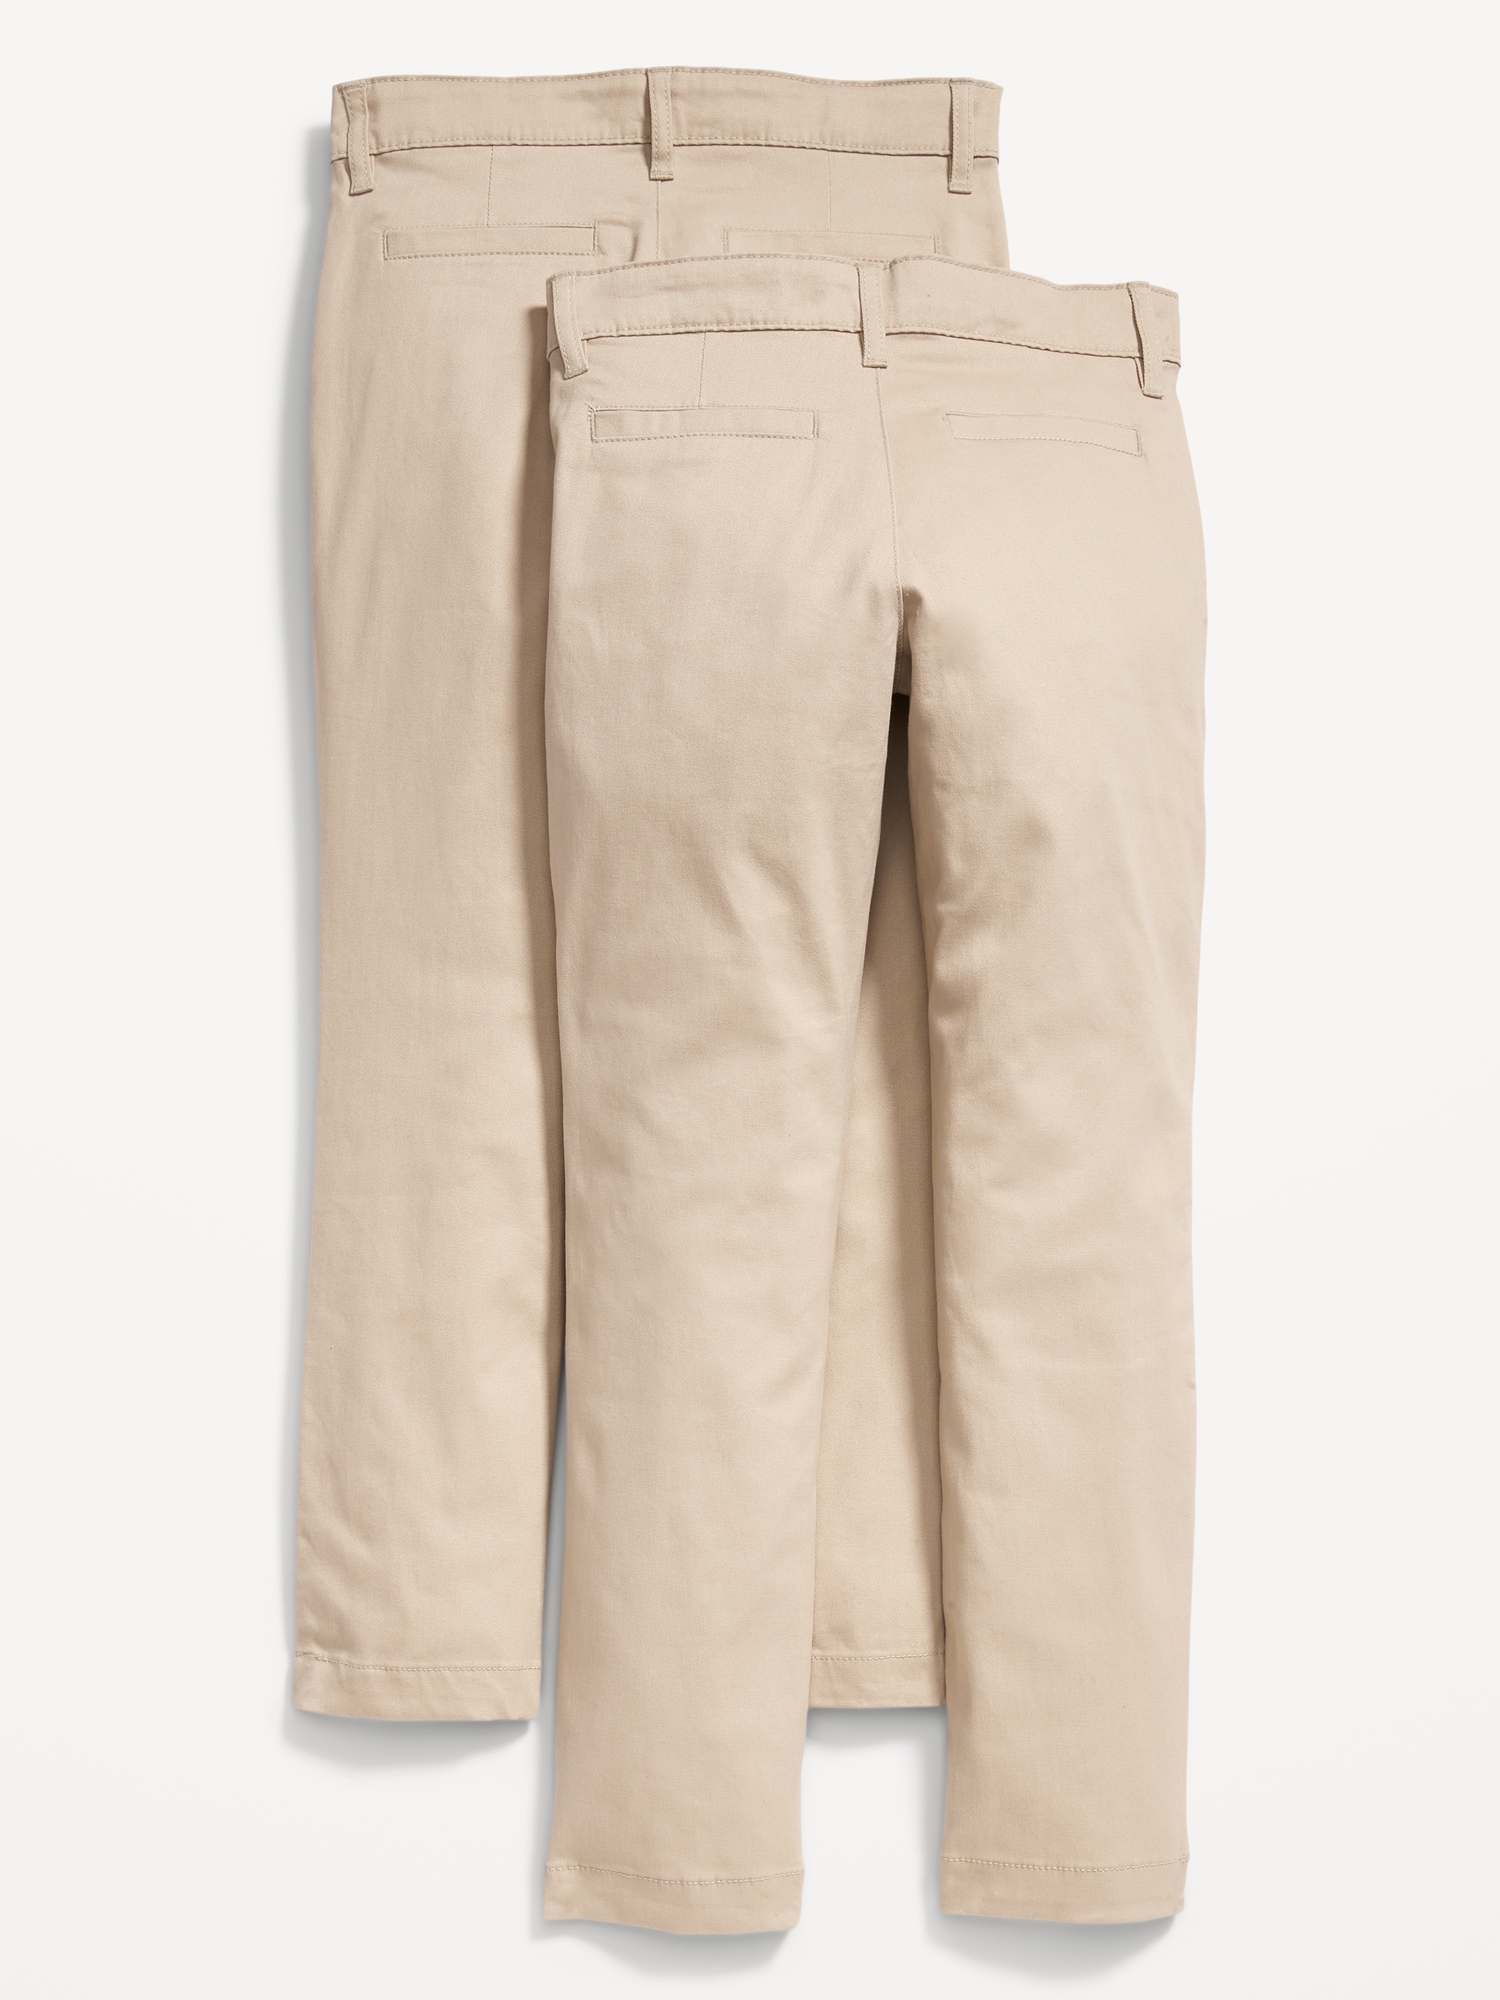 GAP Girls Easy Fit Slim Chino Trousers 15-16 Years W26 L30 Beige Cotton, Vintage & Second-Hand Clothing Online